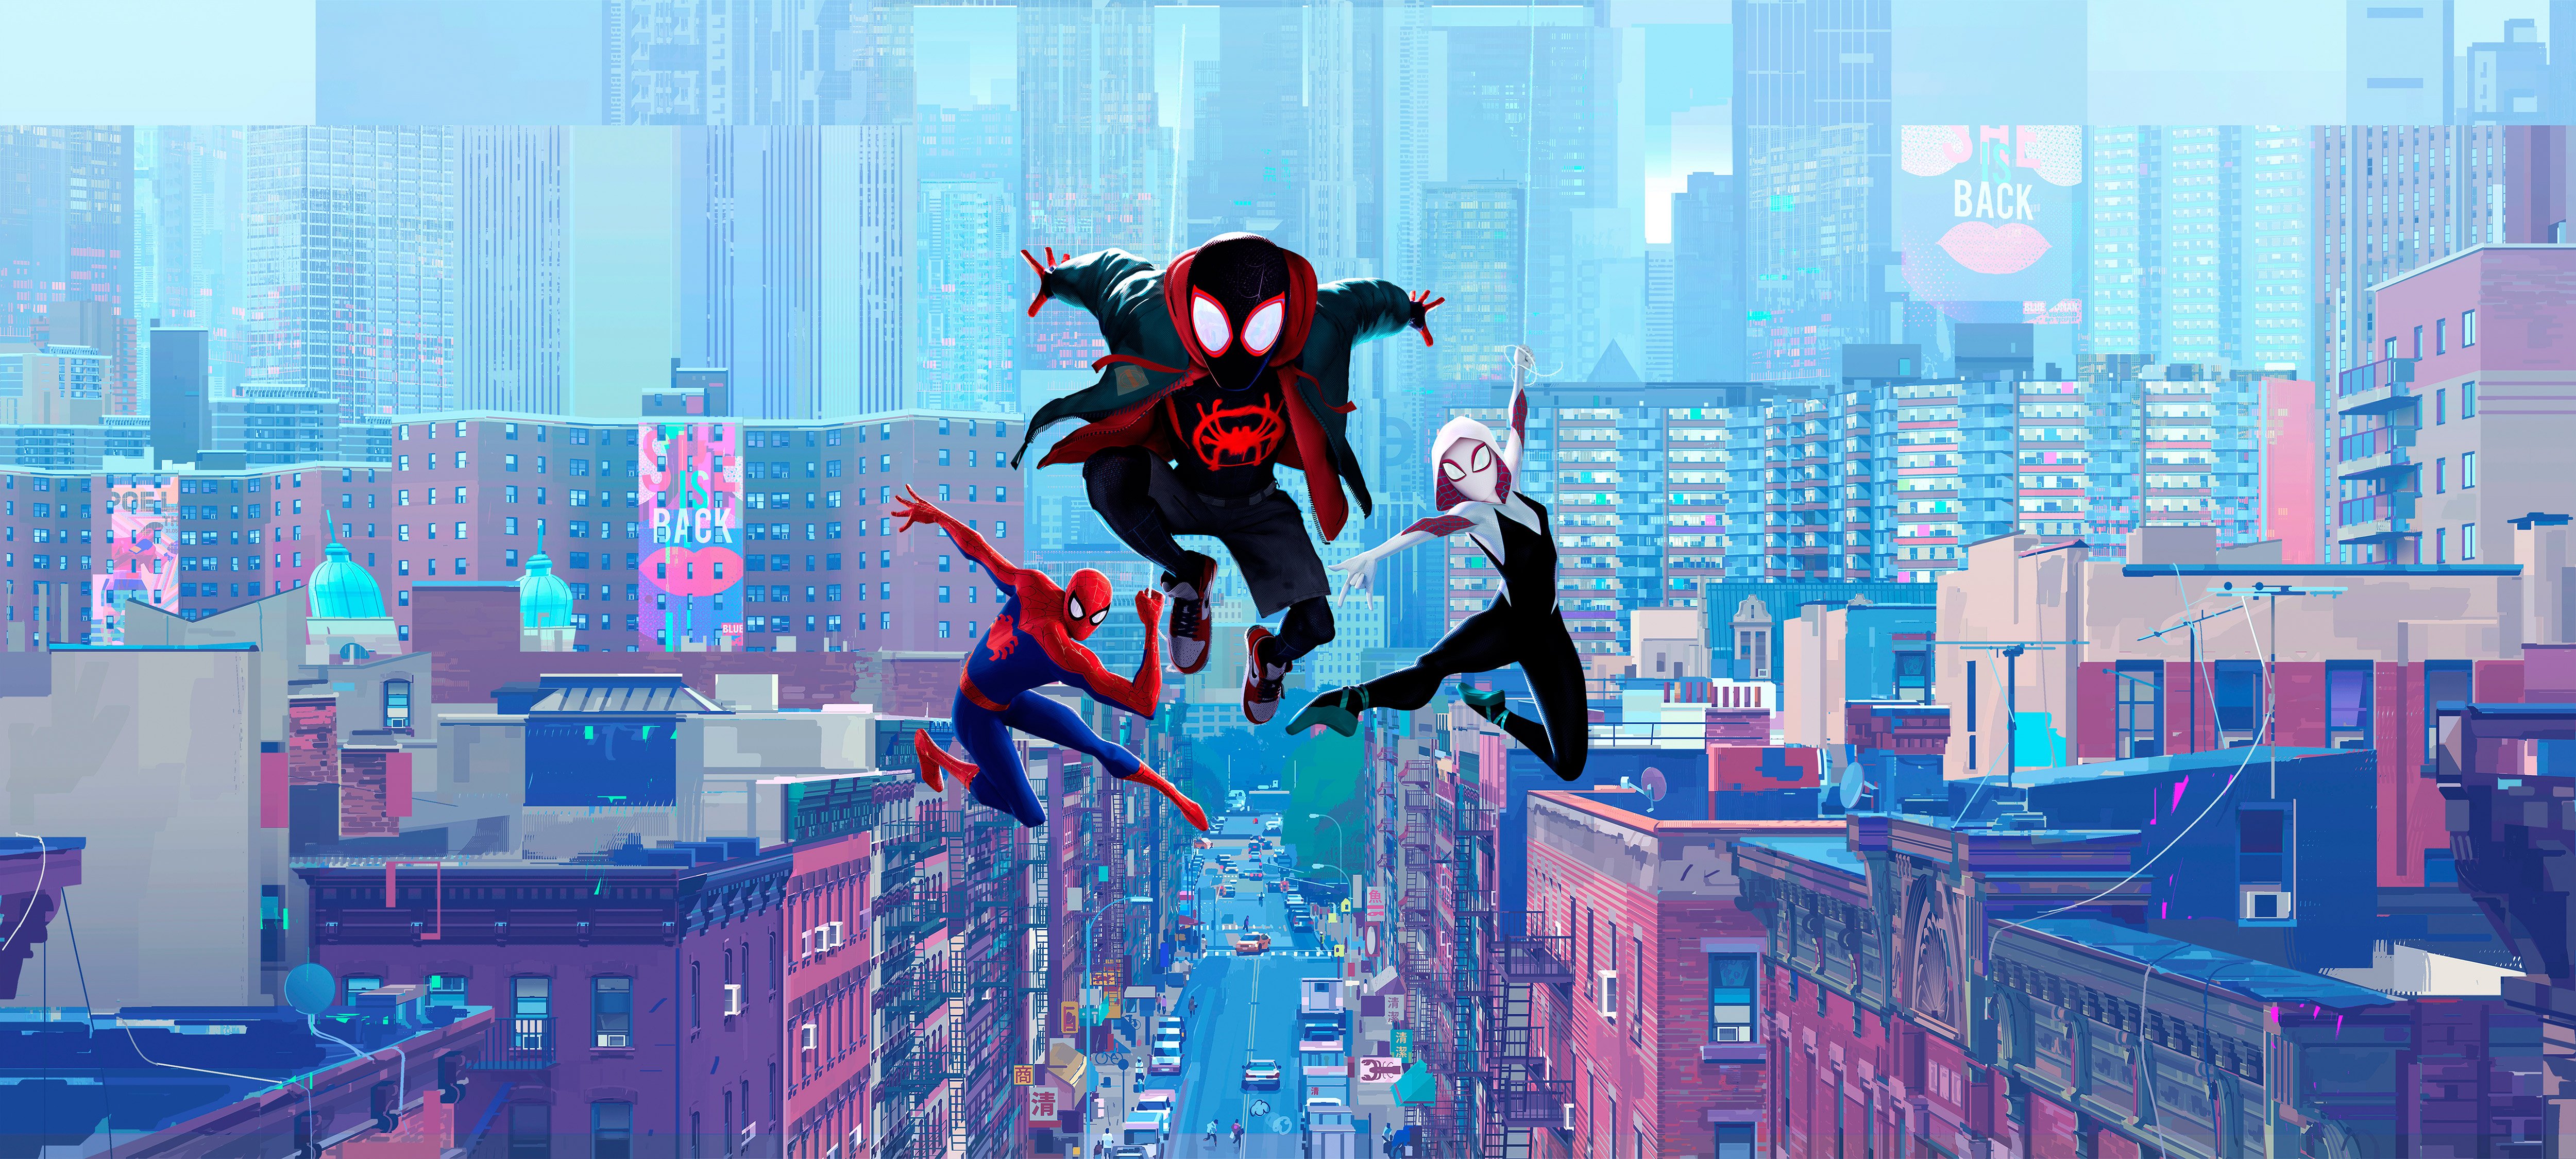 Spider-Verse 4K wallpapers for your desktop or mobile screen free and easy  to download